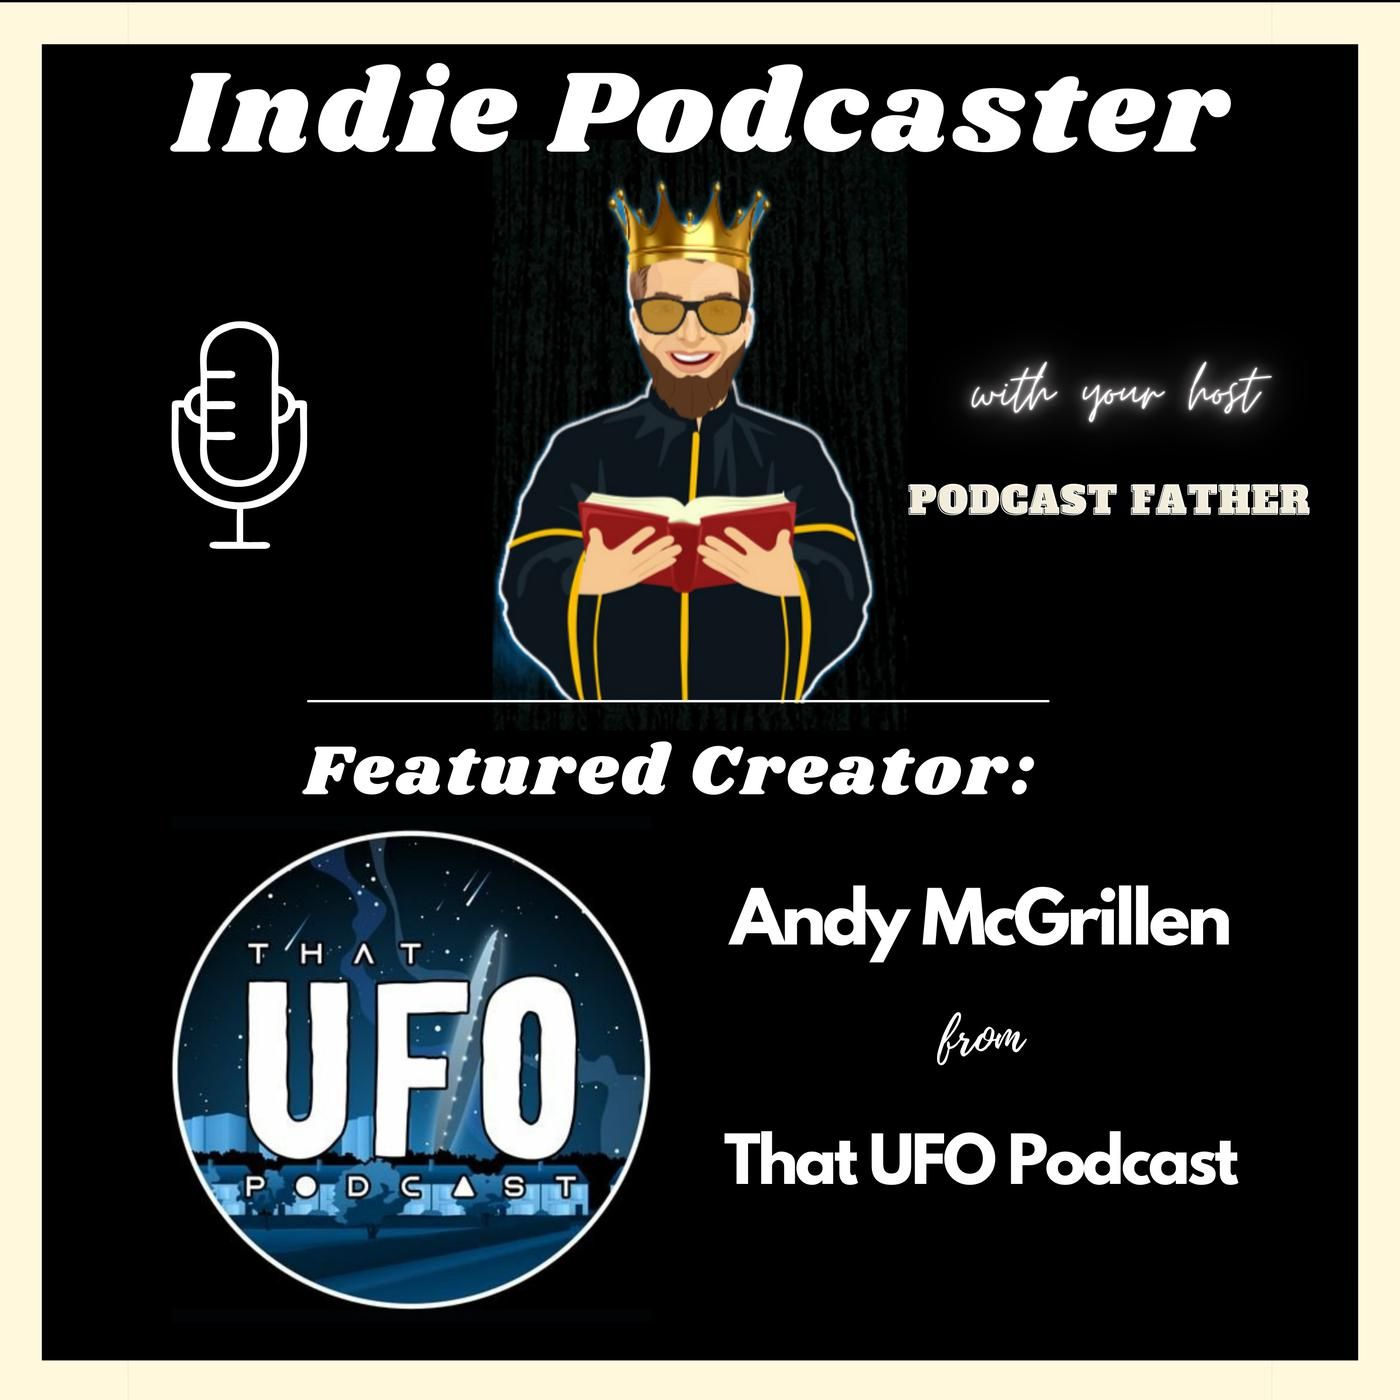 Andy McGrillen from That UFO Podcast interview by Jeff the Podcast Father from Indie Podcaster